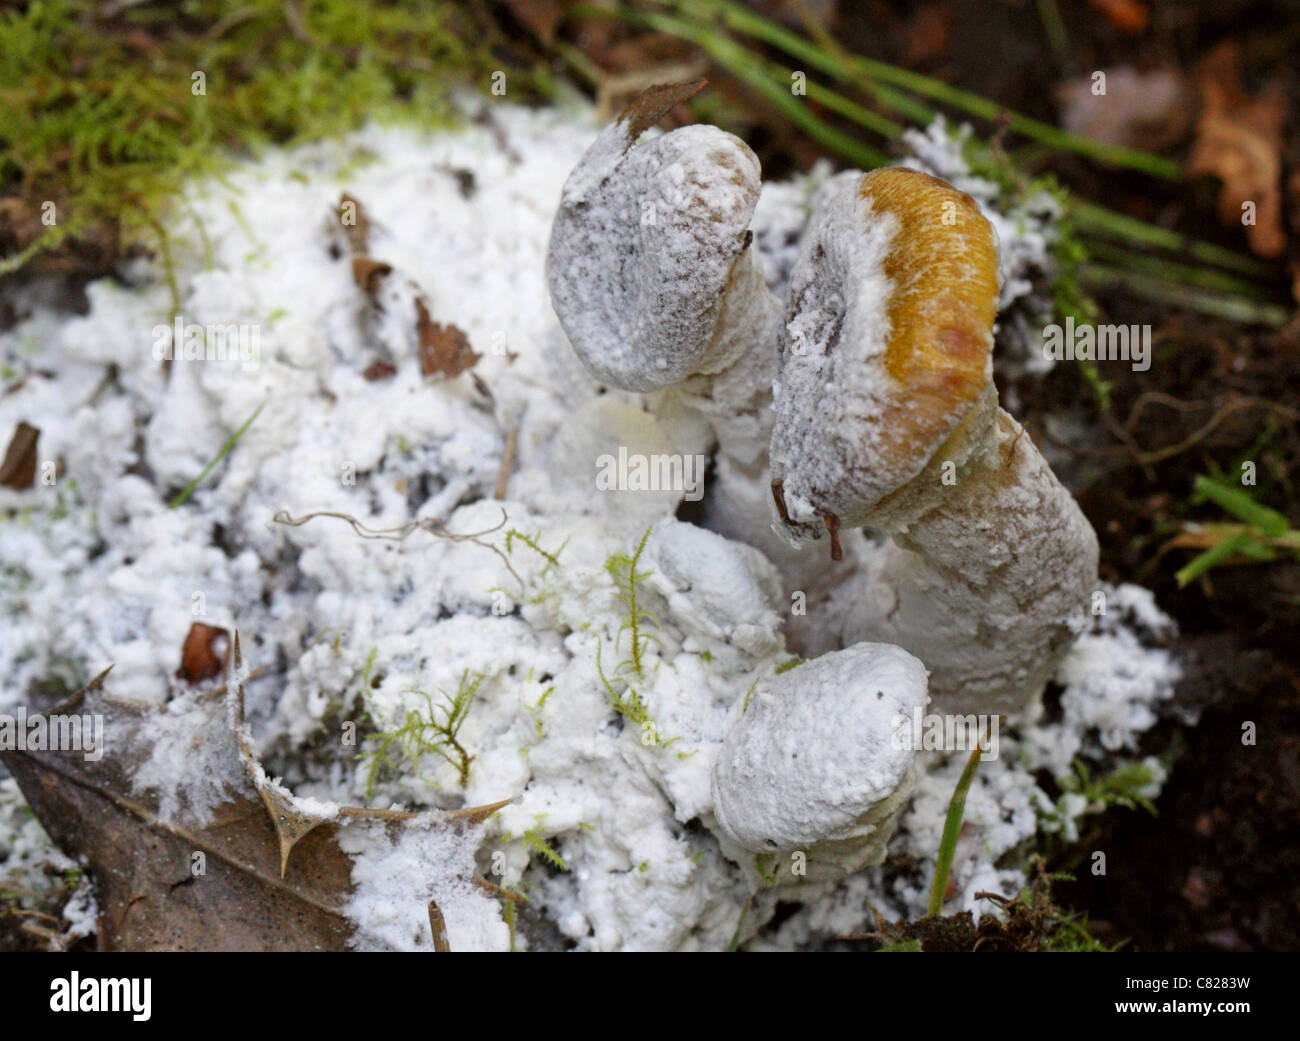 White Parasitic Mould Growing on Honey Fungus (Armillaria mellea). Possibly in the Hypocreaceae Family. Stock Photo